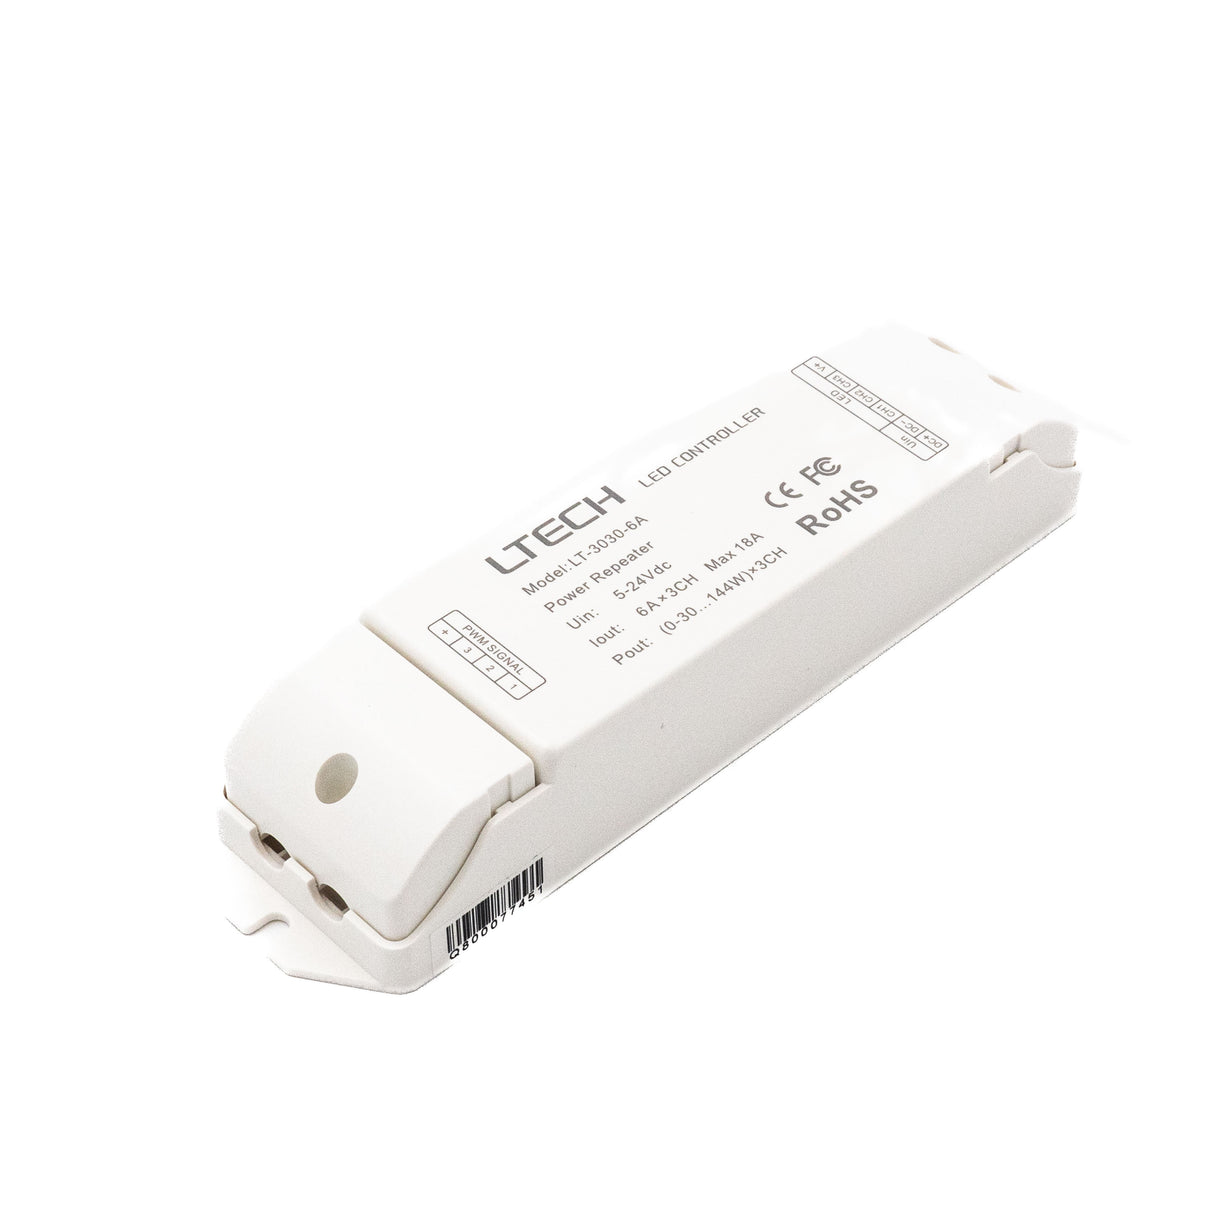 Ltech LT-3030-6A PWM Constant Voltage Repeater - RGB